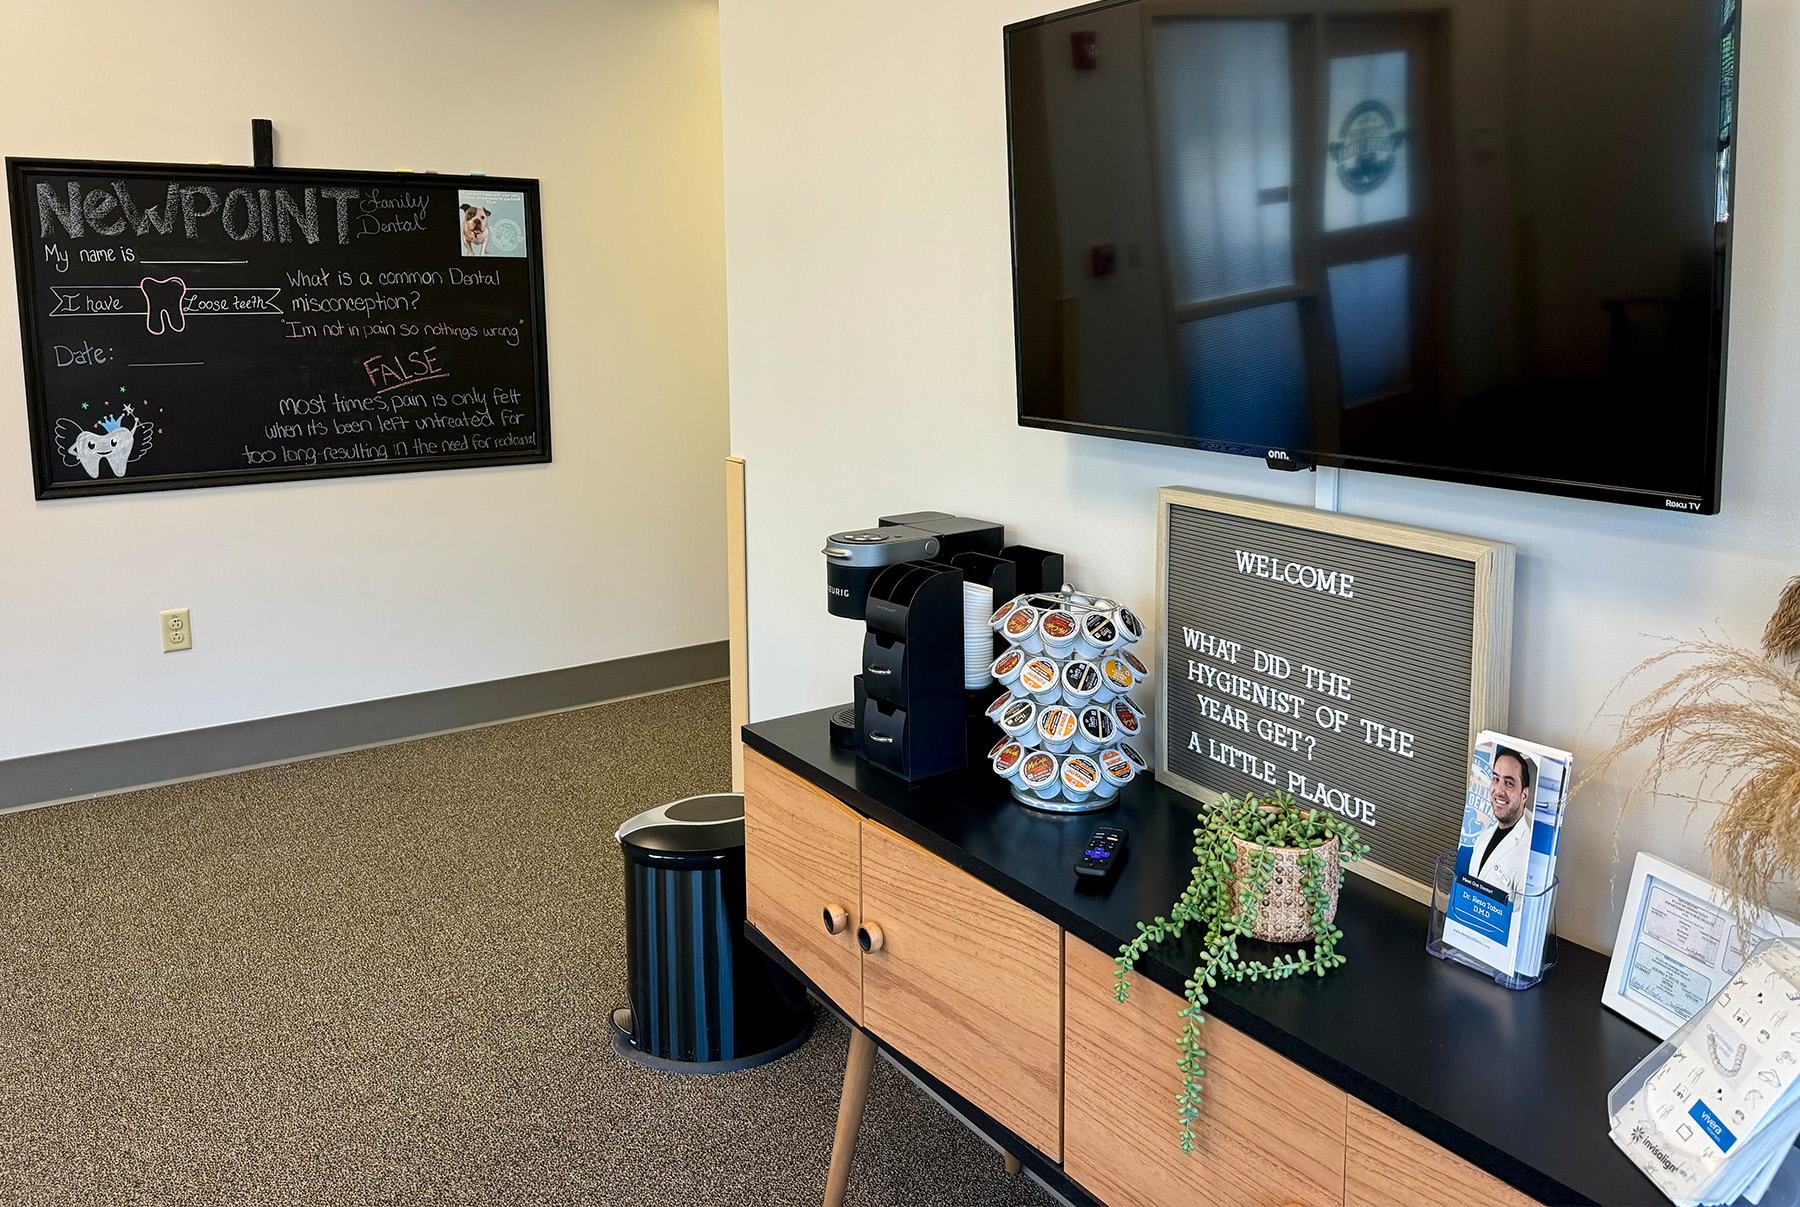 The image shows an office reception area with a television screen displaying the channel logo, a coffee station, a sign with a message, and a framed photo on a desk.